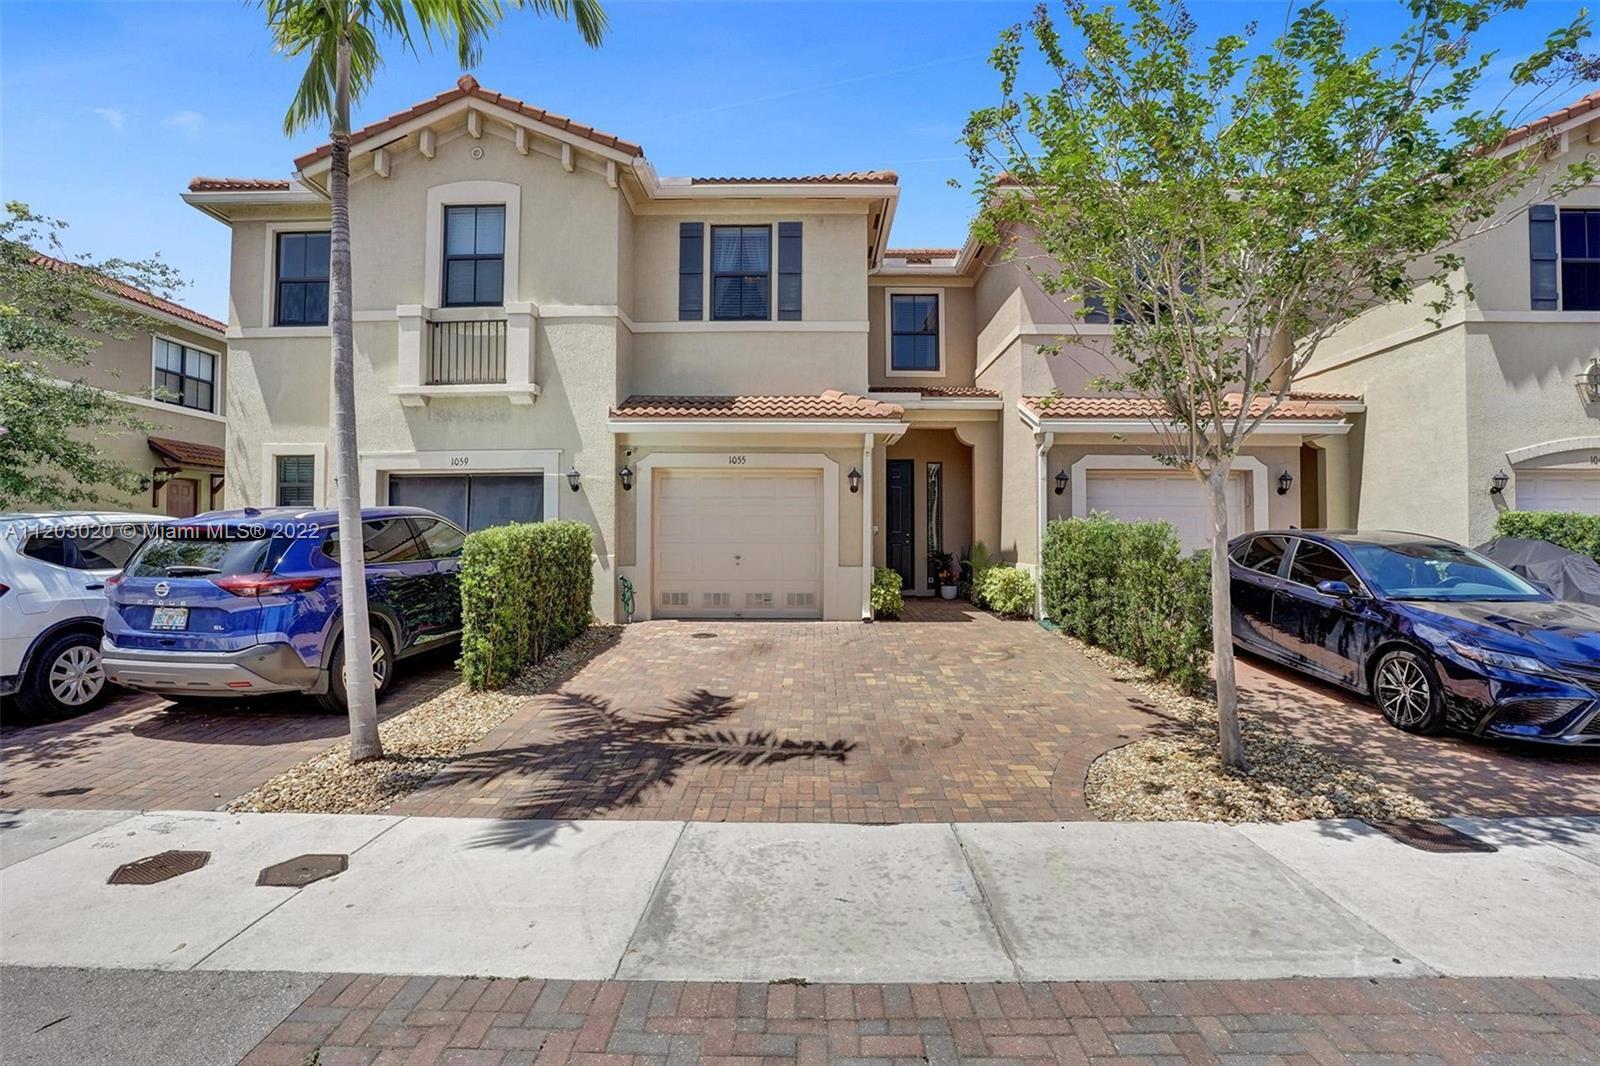 Amazing Location in the Booming Pompano Beach! Newer Construction 2018 Townhome Located within a Qui